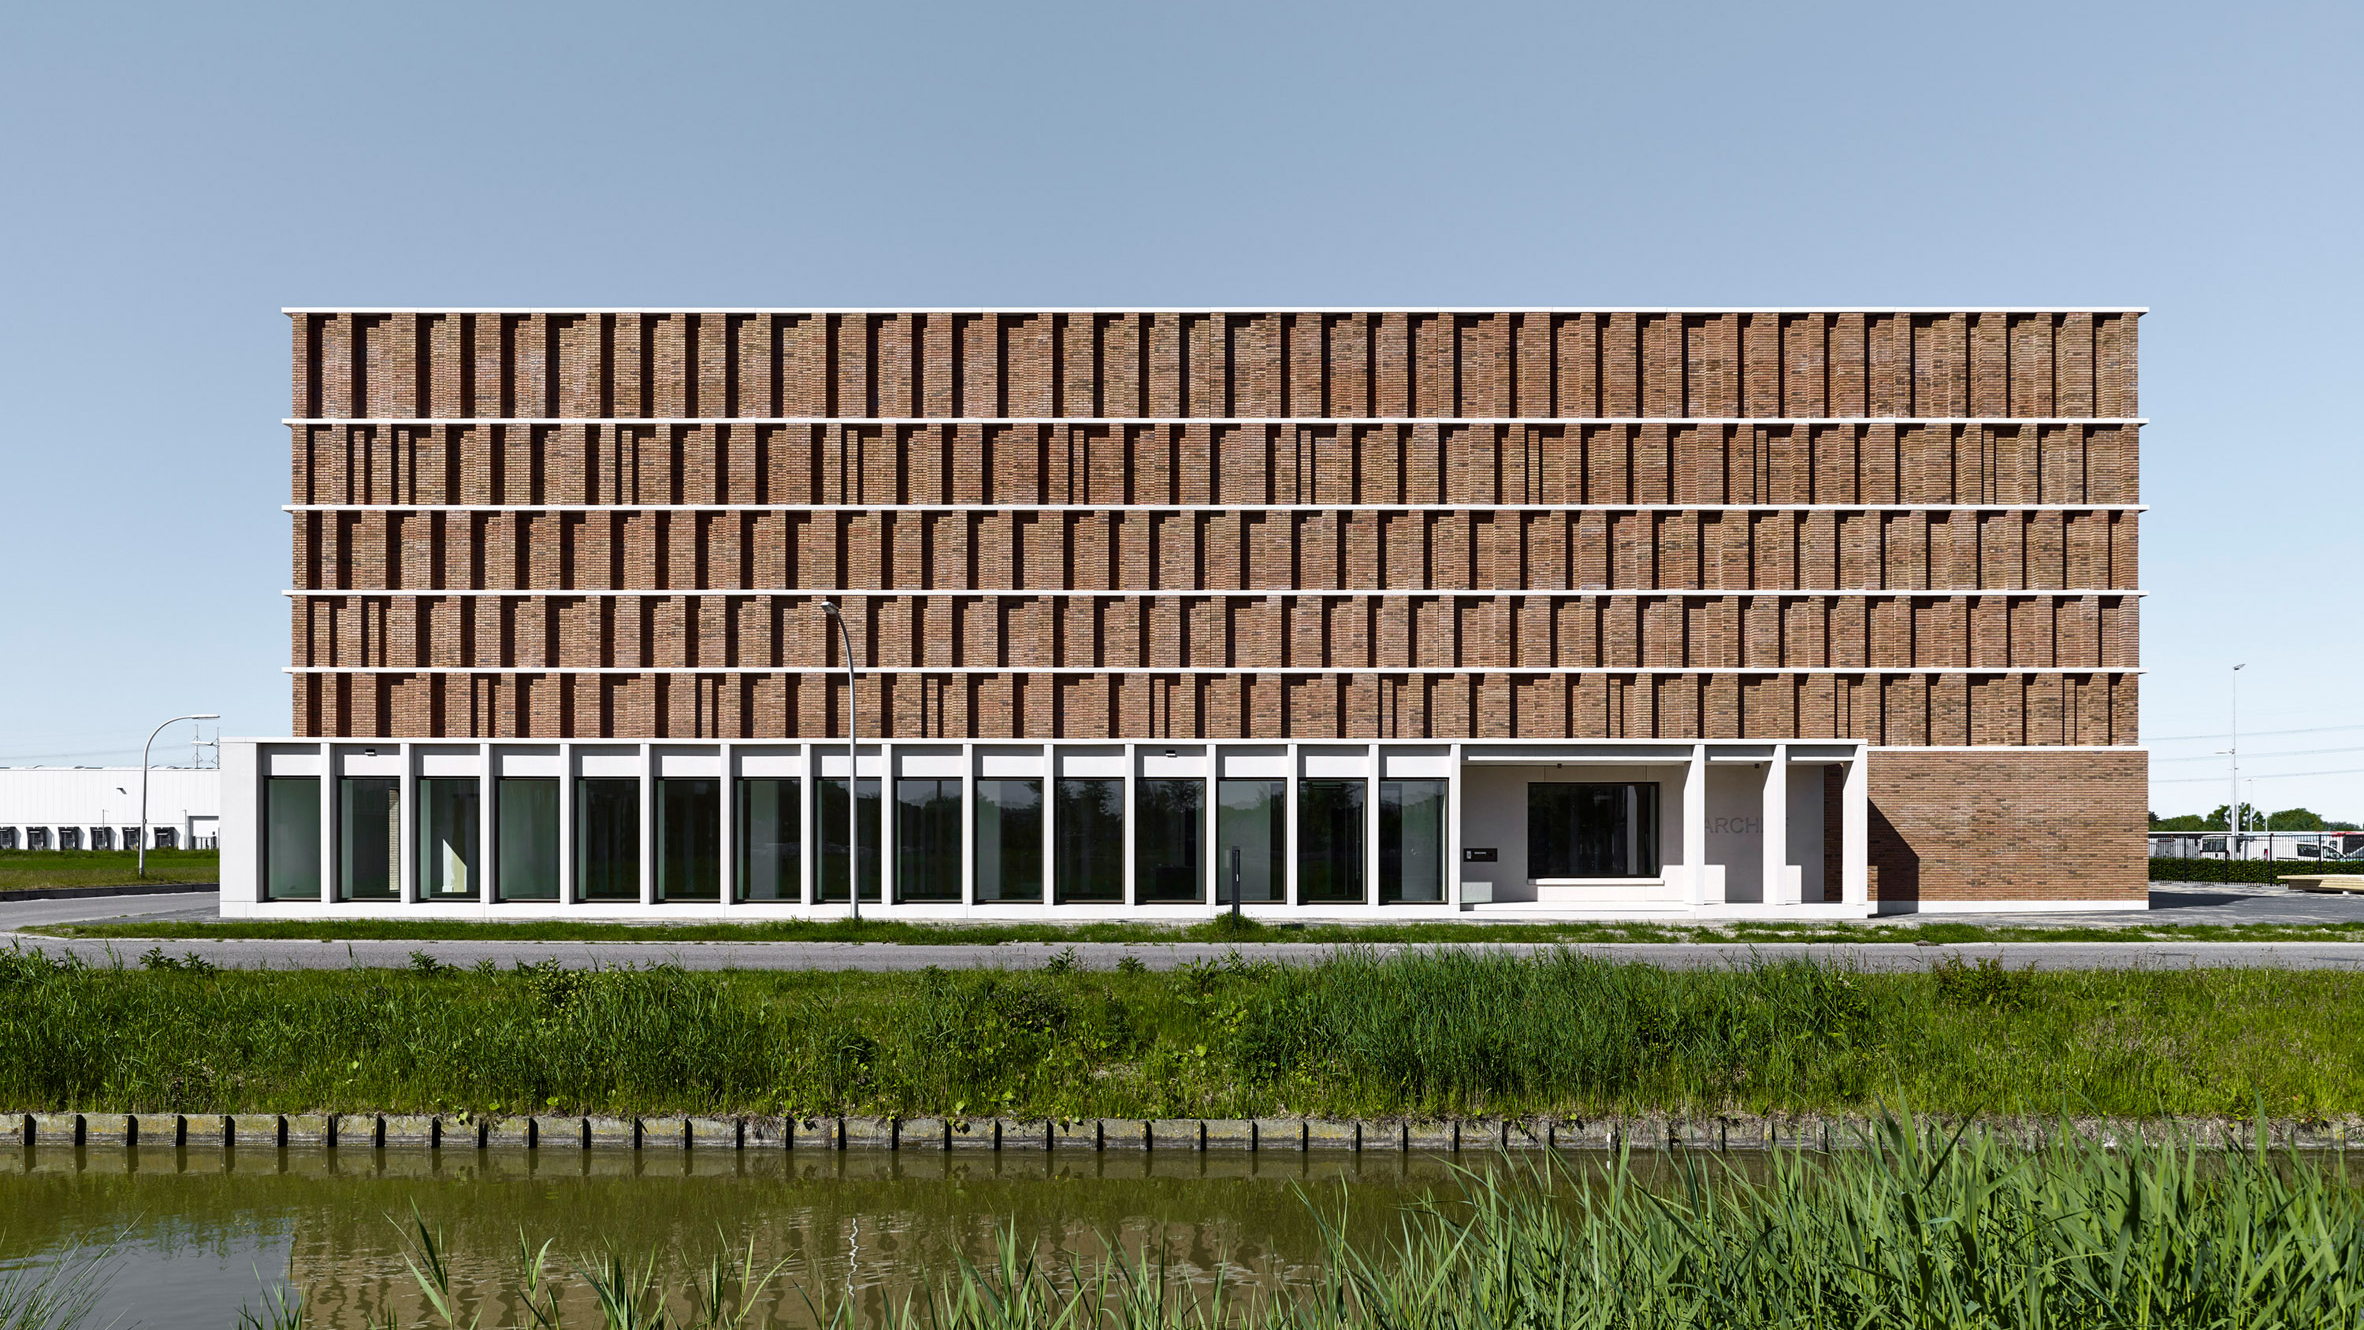 Delft city archive by Office Winhov and Gottlieb Paludan Architects